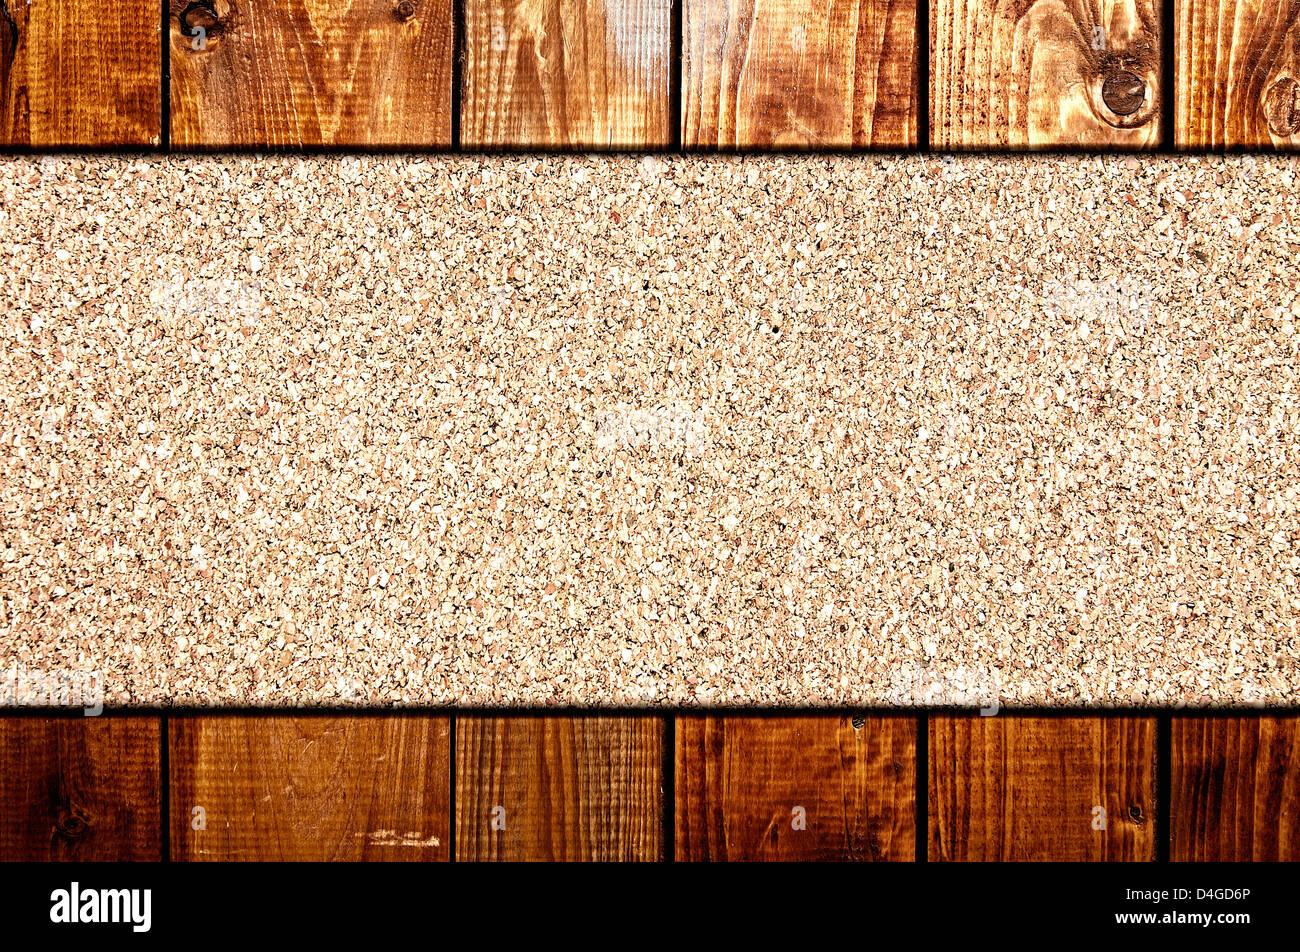 Cork board at wooden panel wall interior background Stock Photo